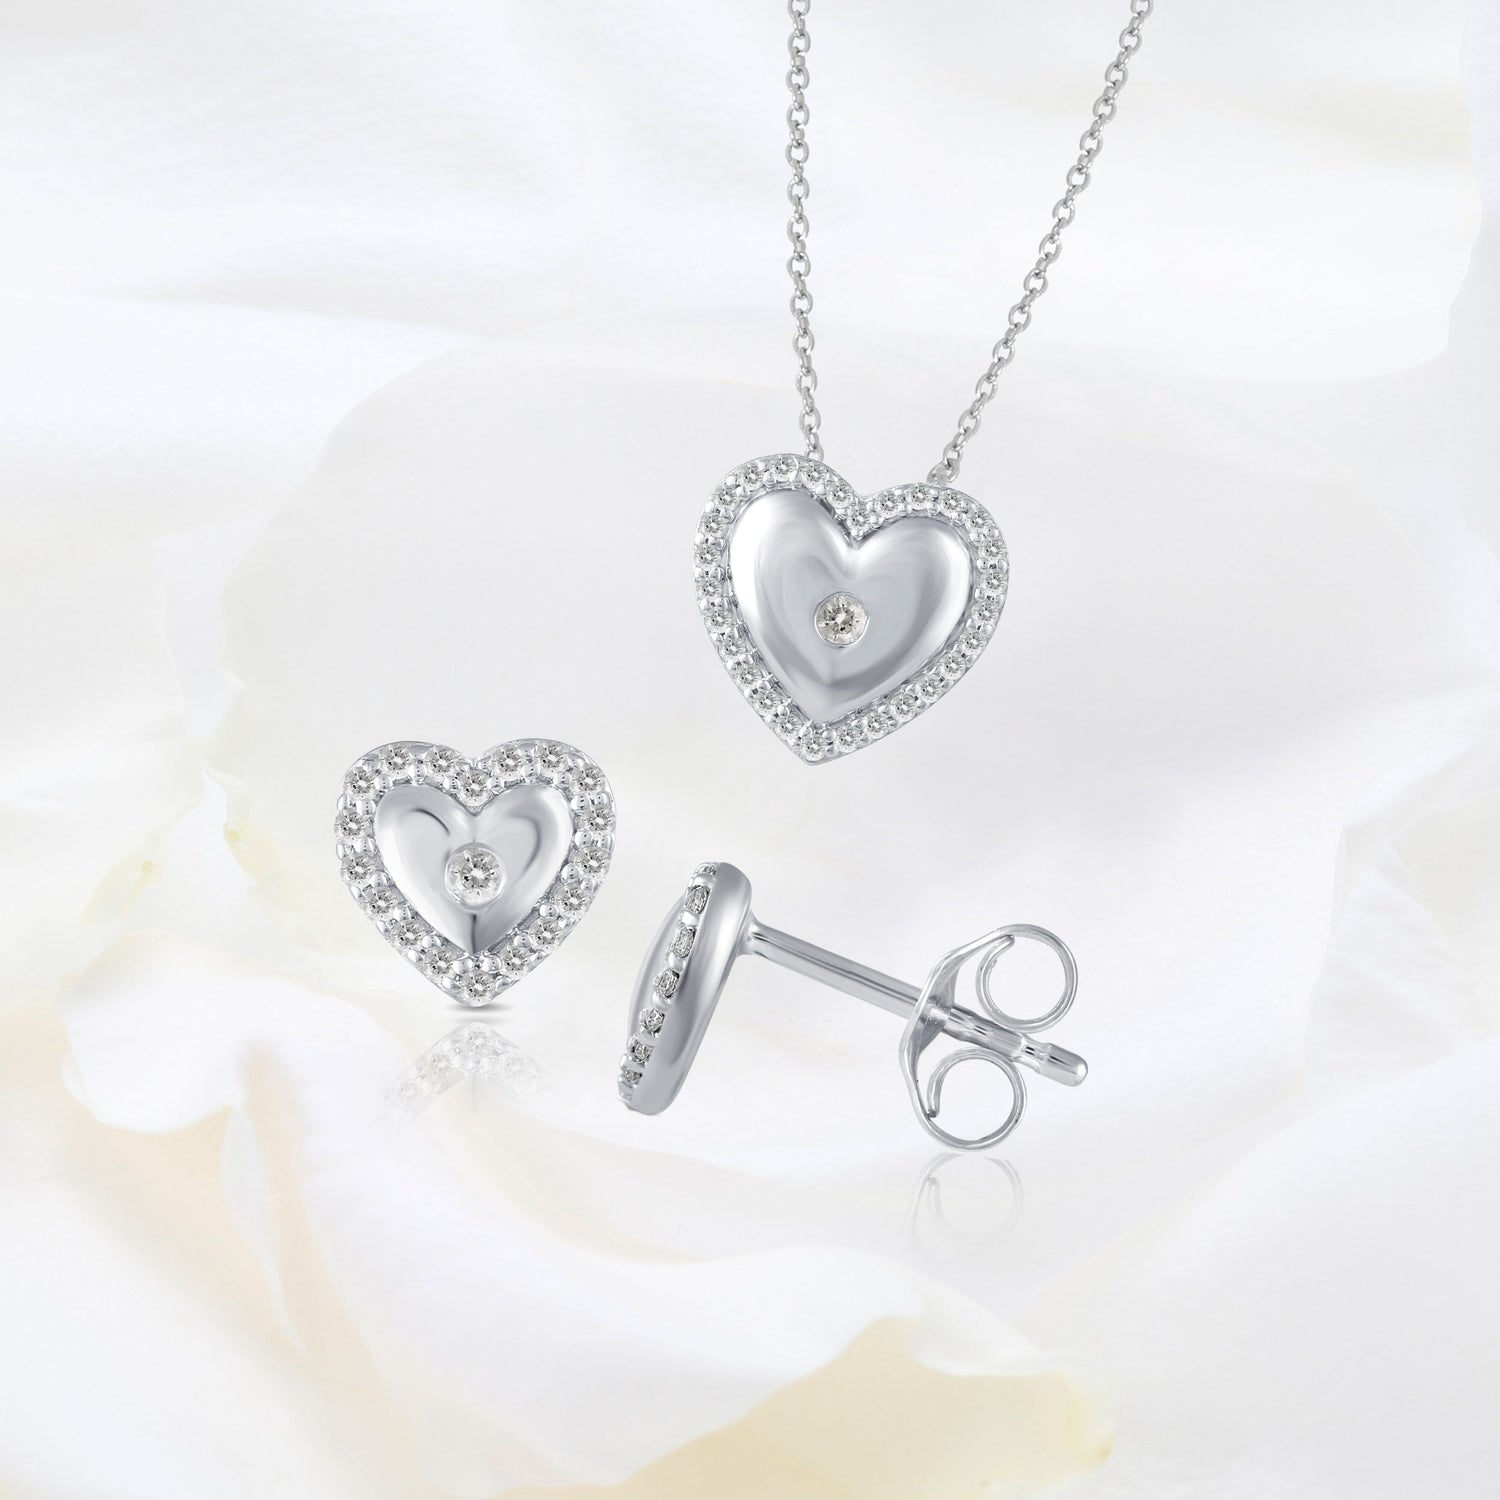 Puffed Heart Chain Extender in Sterling Silver